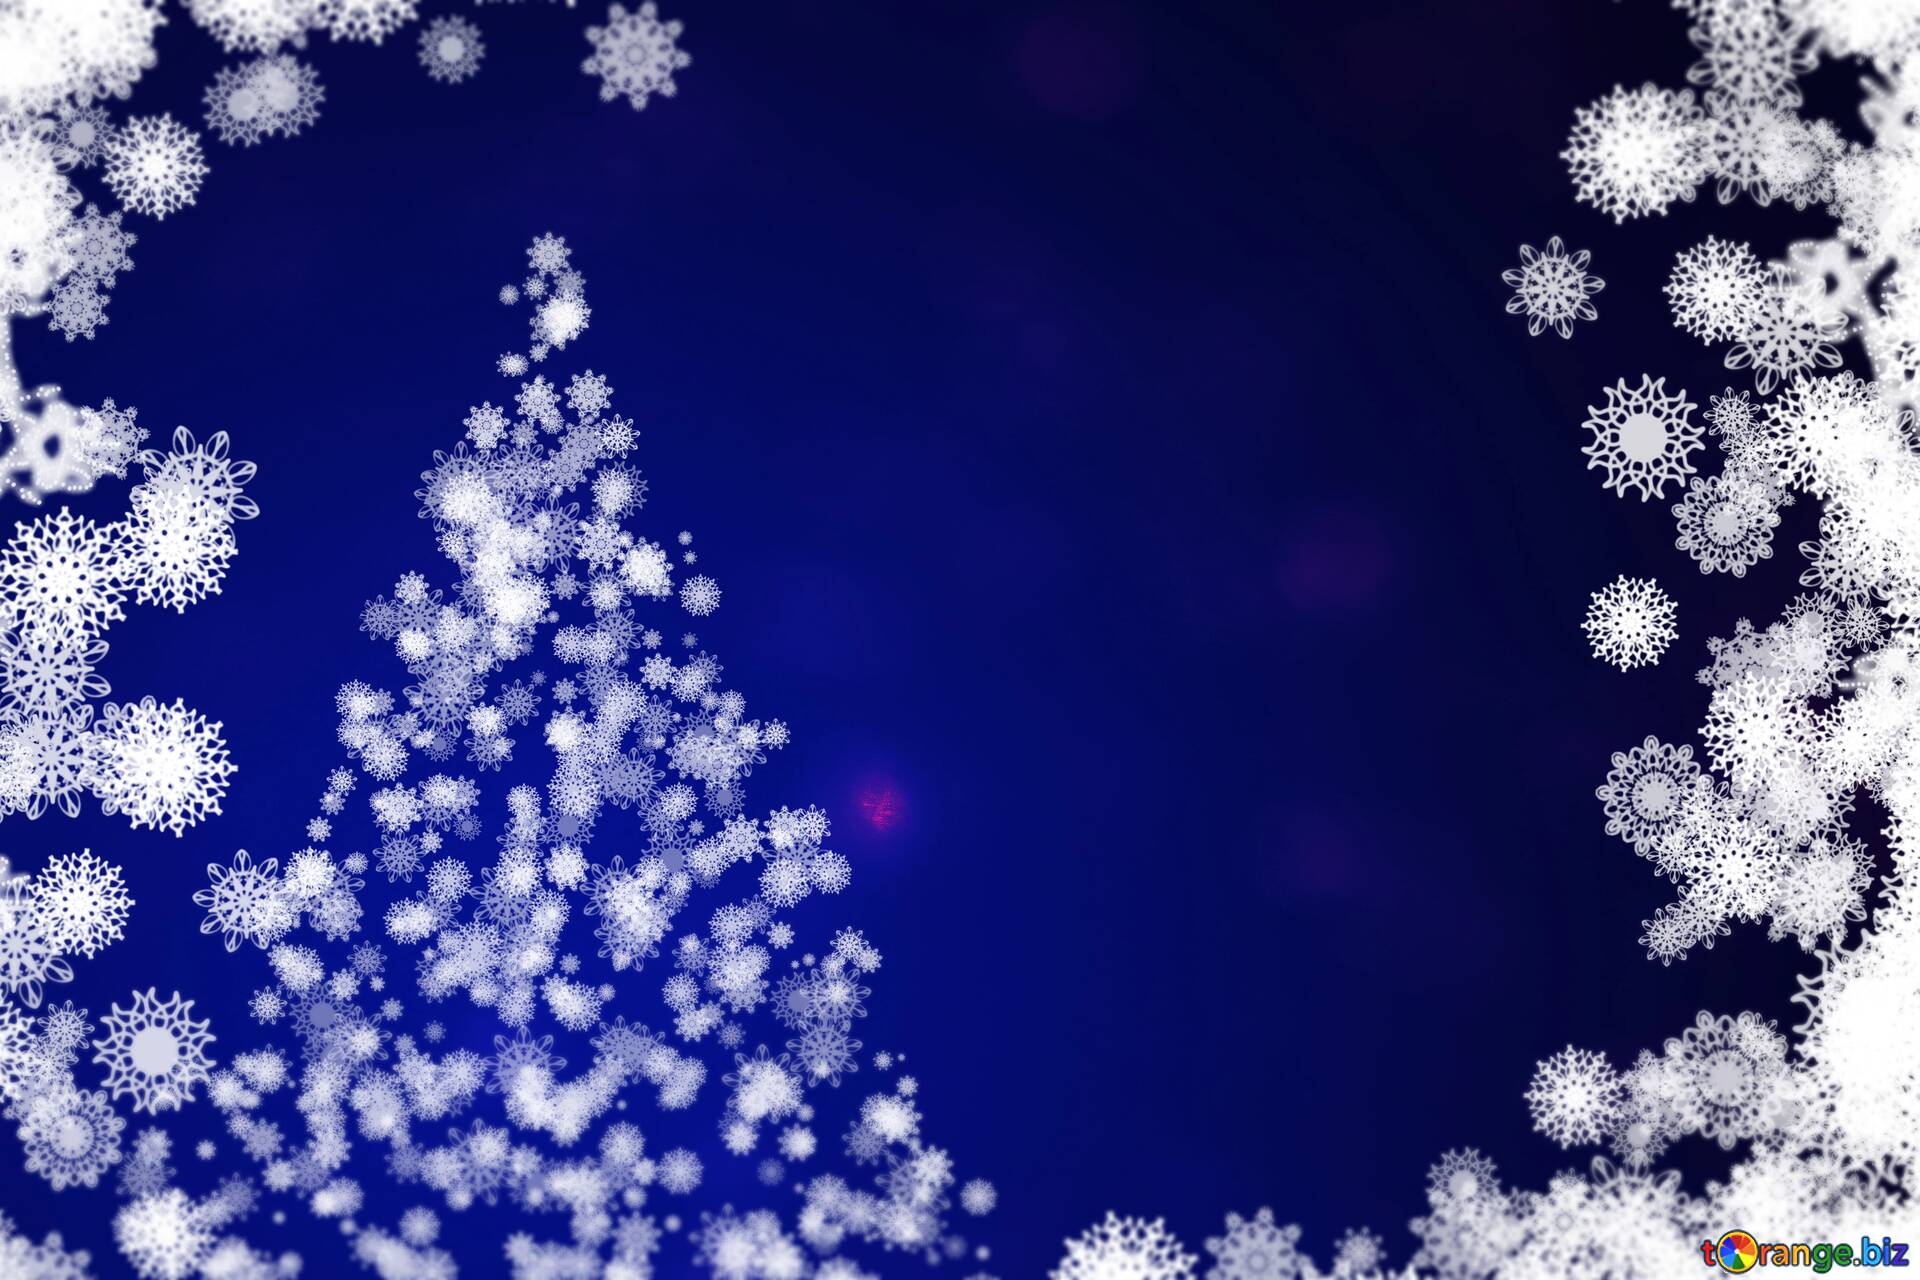 Download free picture Blue color. Background clipart Christmas tree with  snowflakes. on CC-BY License ~ Free Image Stock  ~ fx №1838